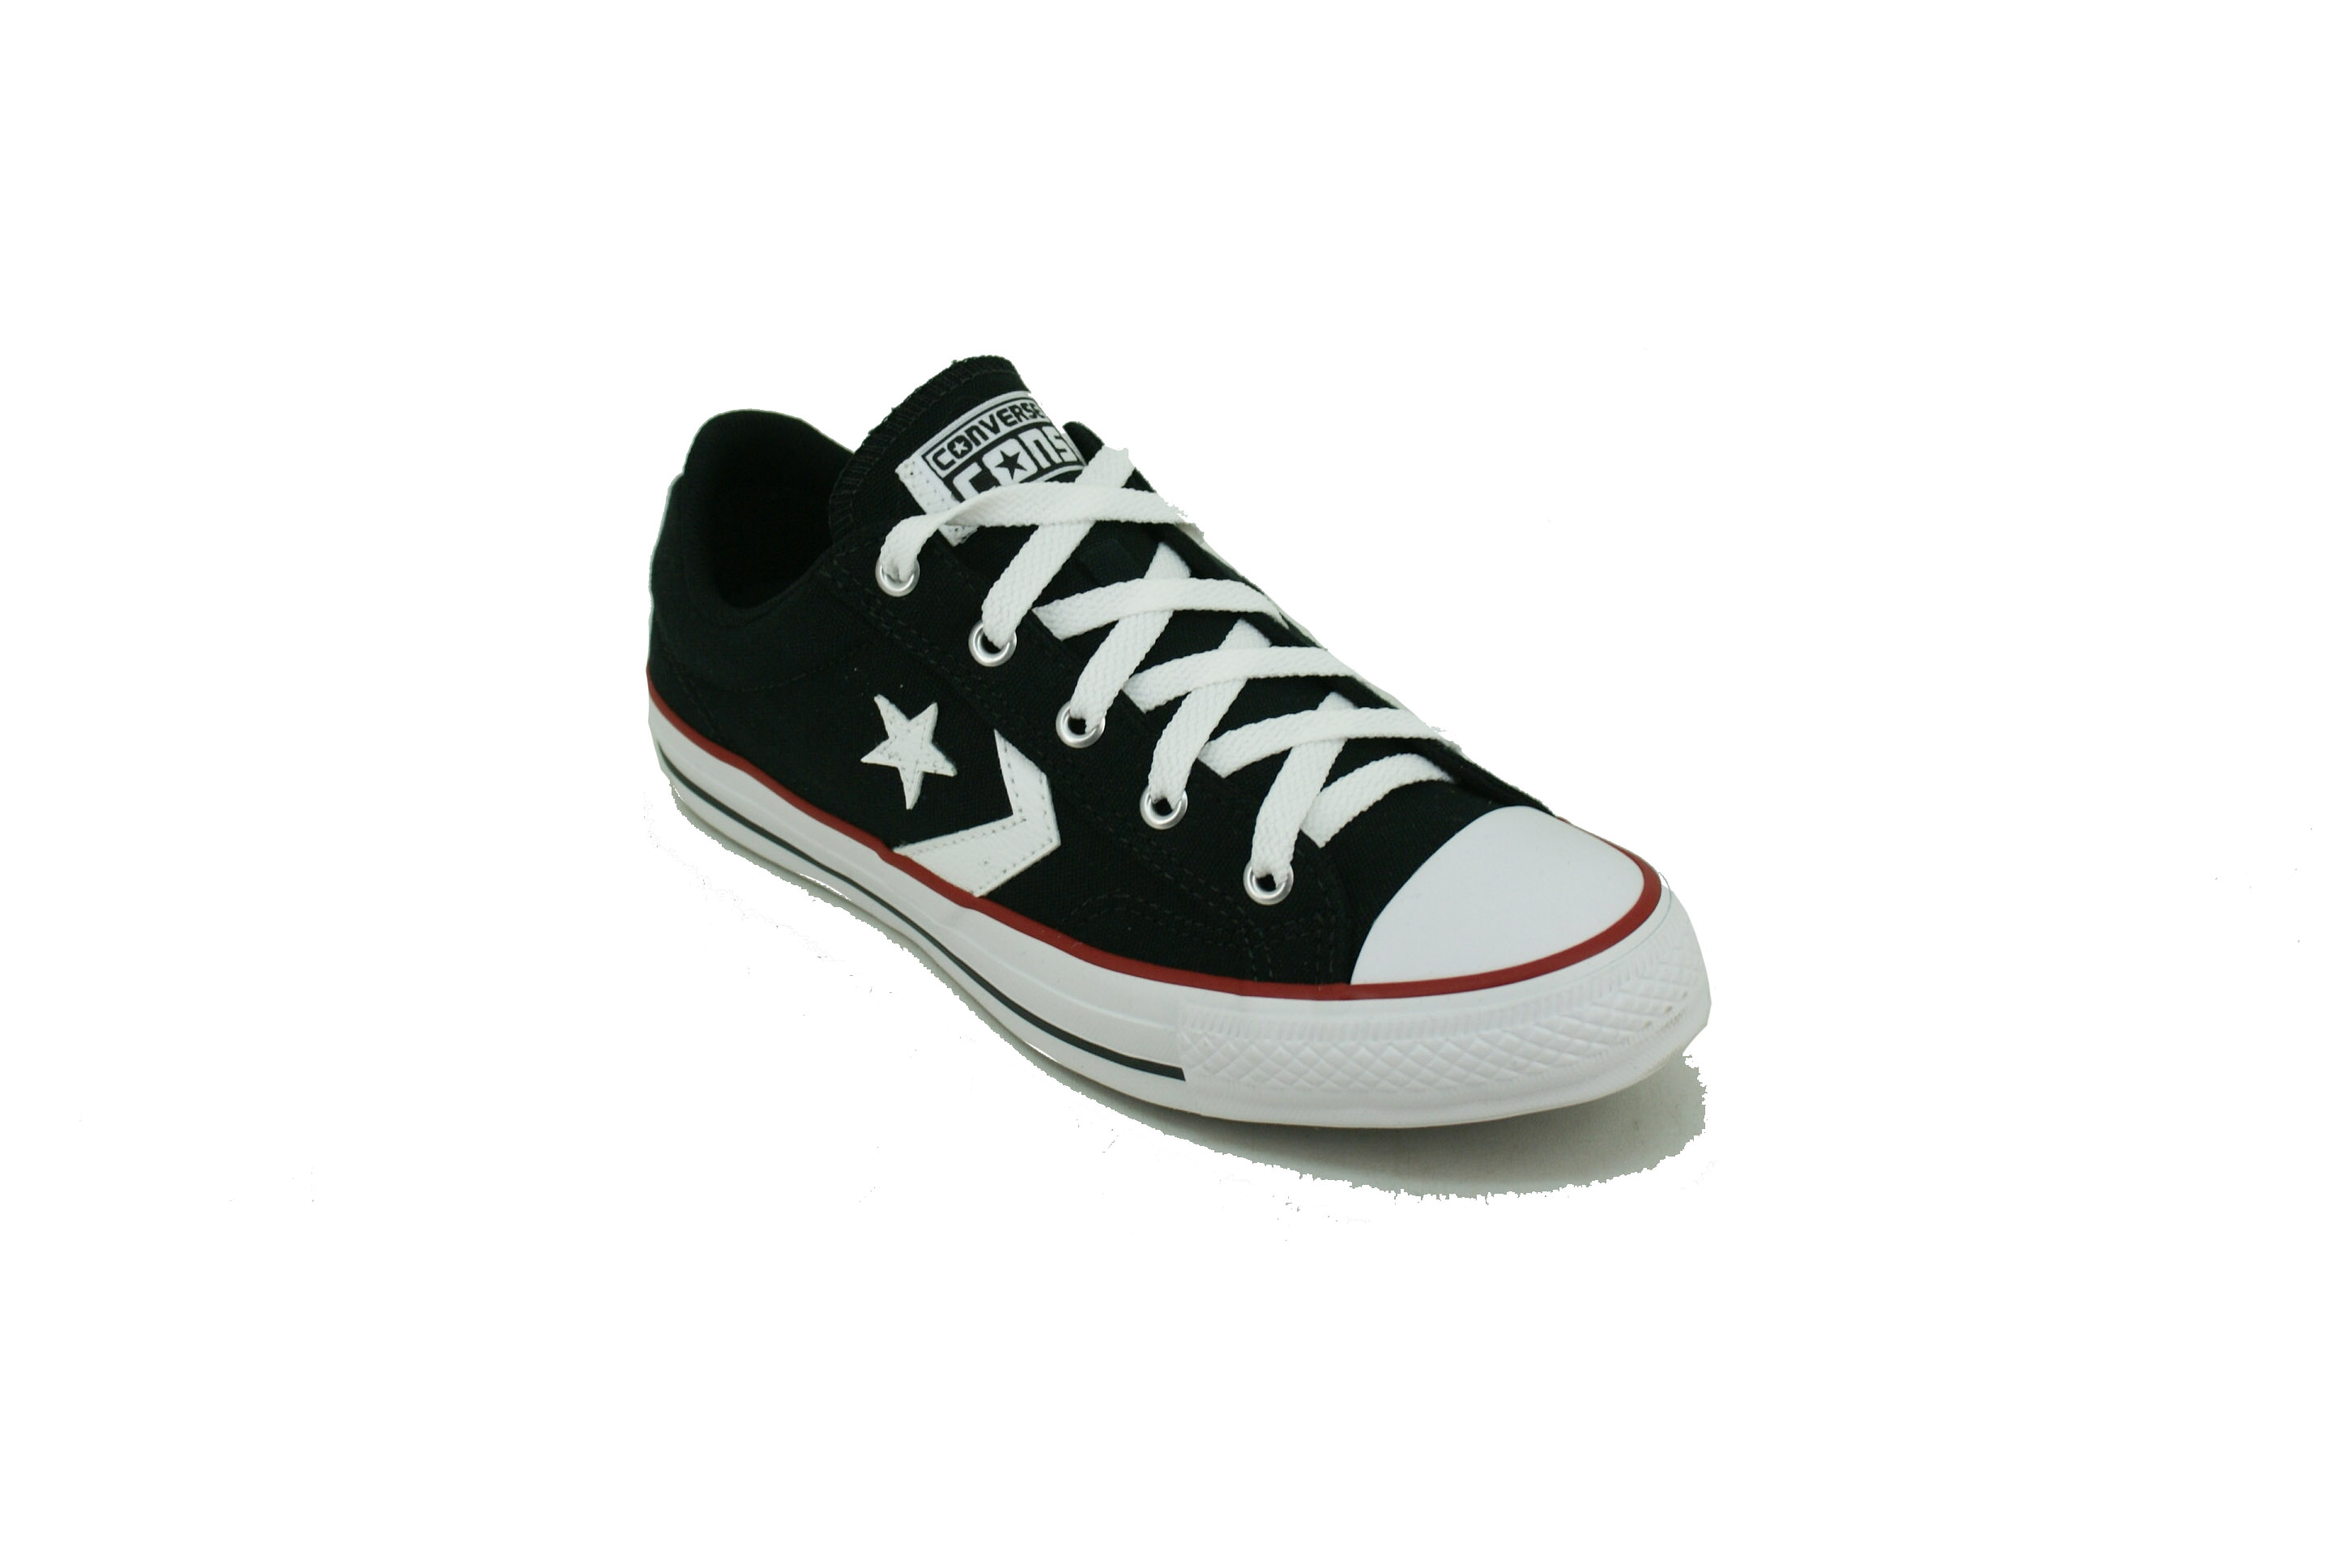 converse star player mujer